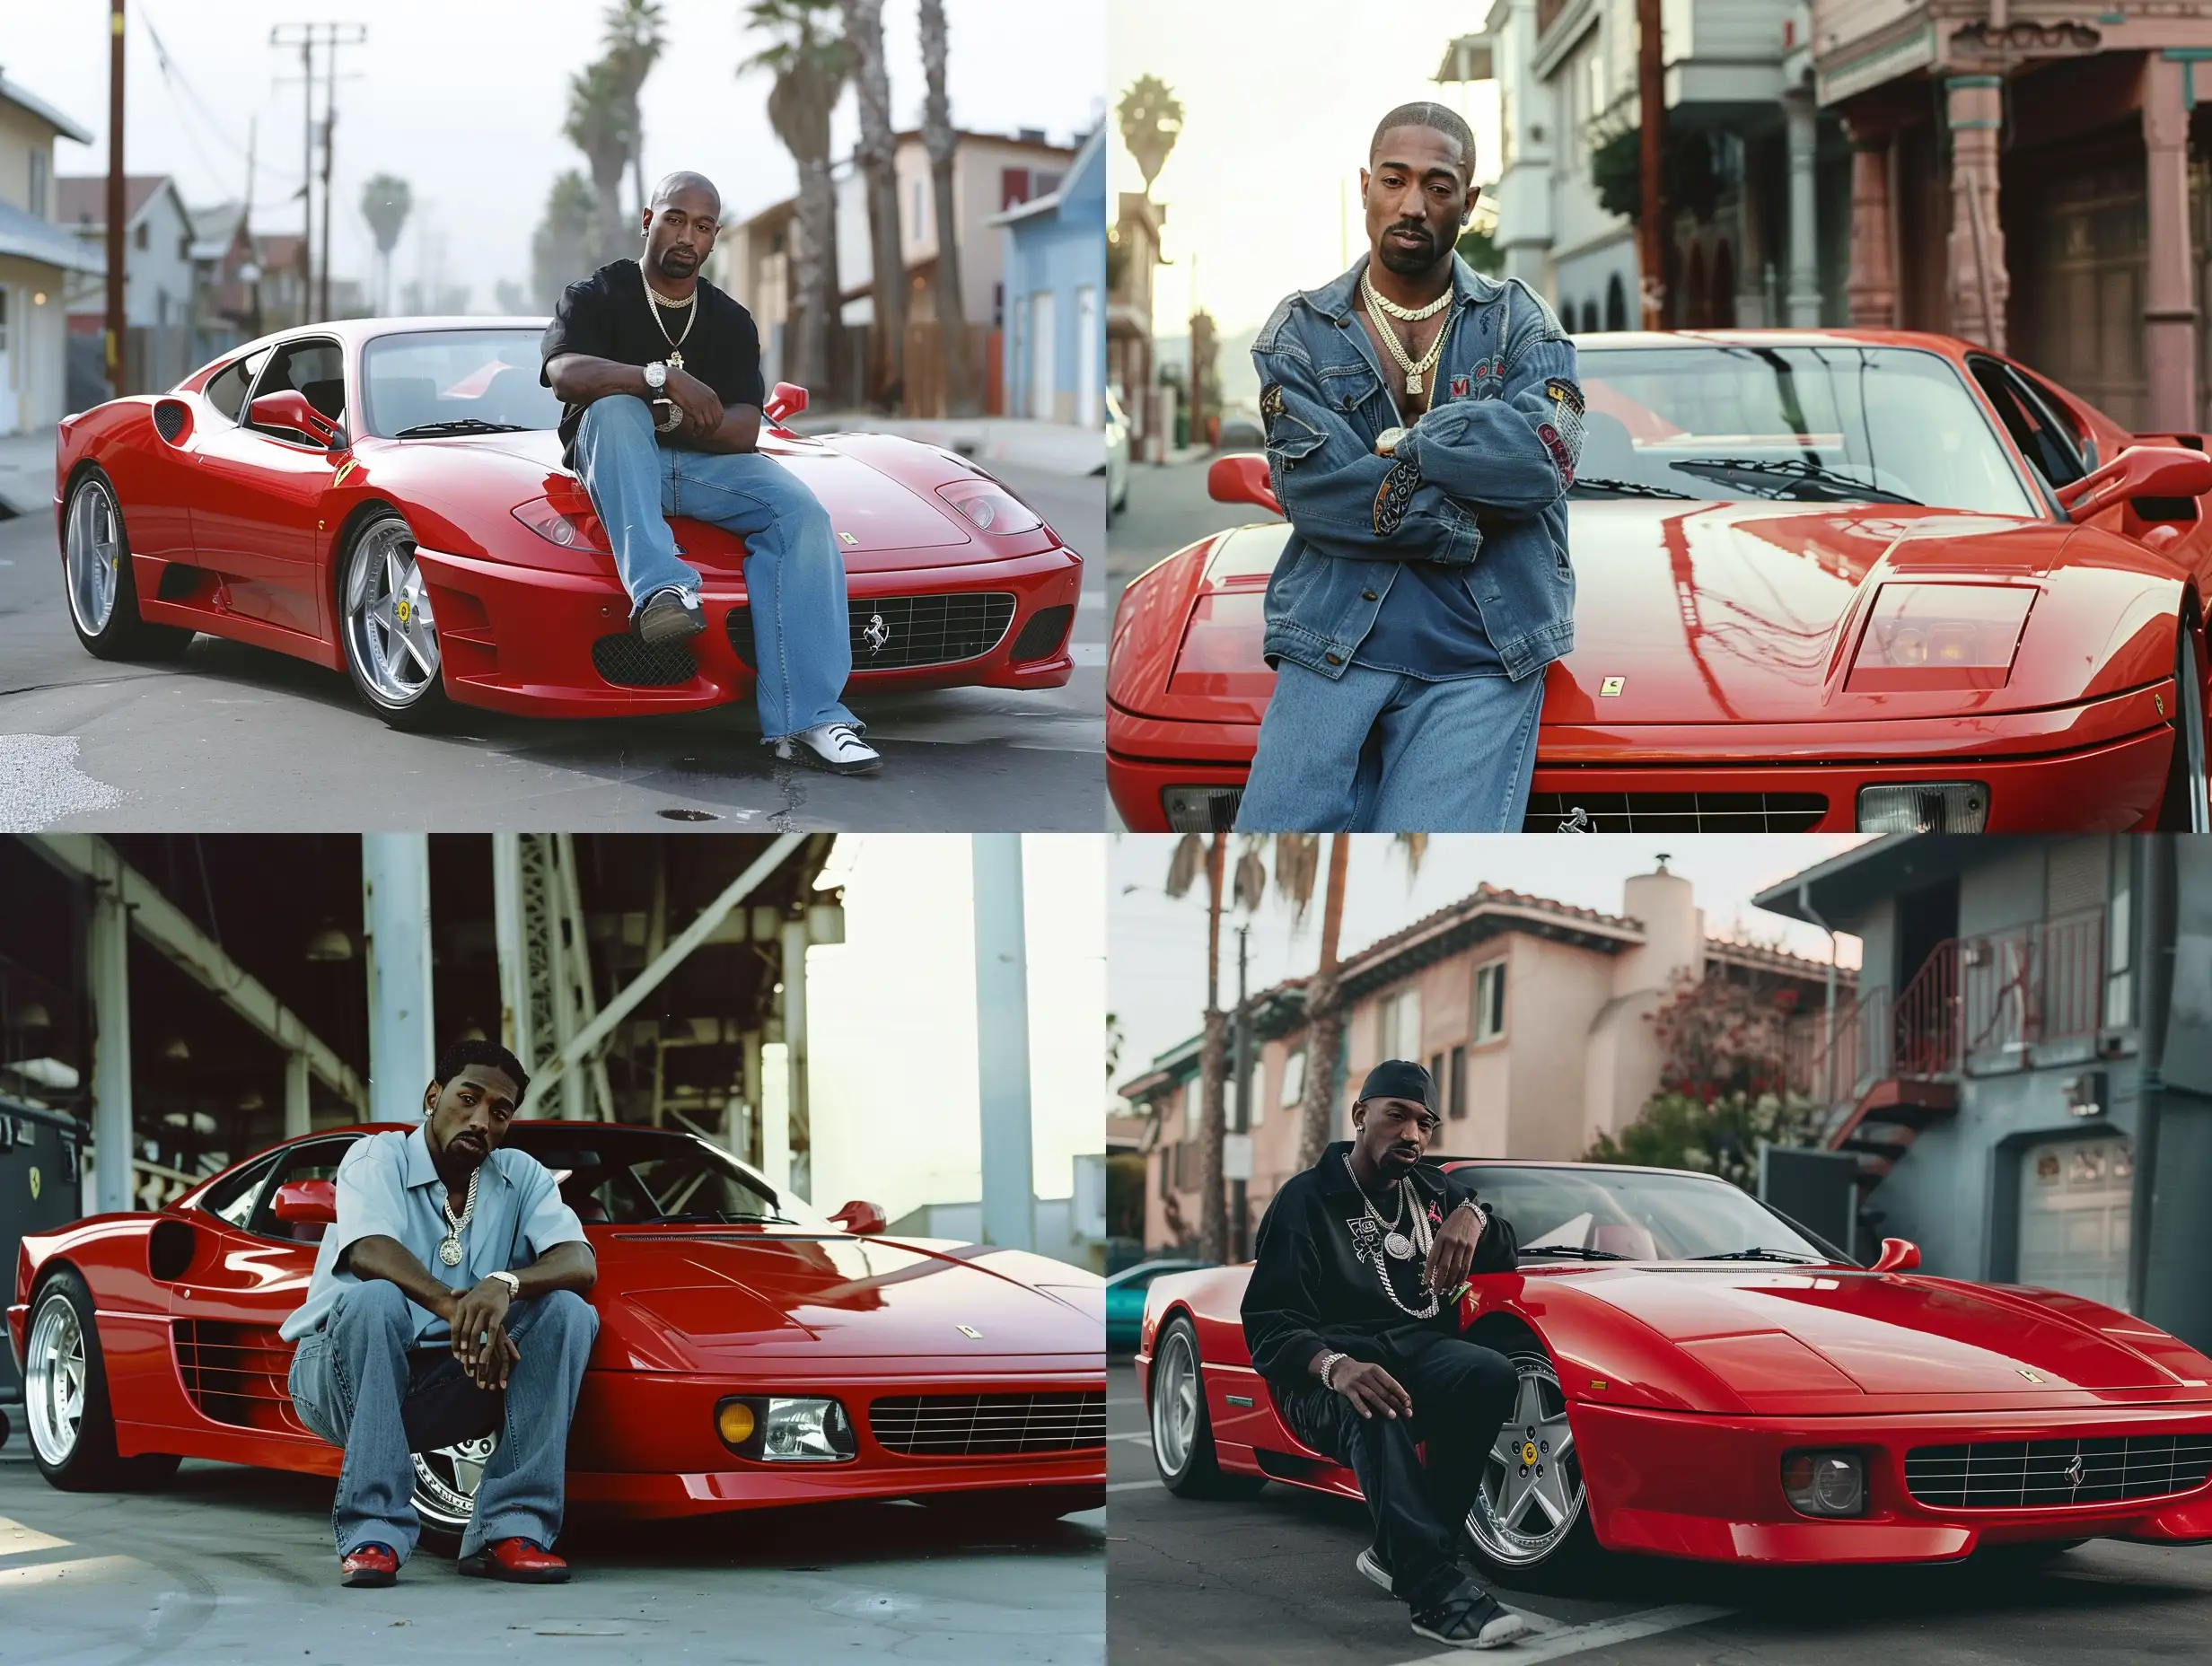 Tupac-Shakur-Poses-with-Red-Ferrari-Iconic-Portrait-Photography